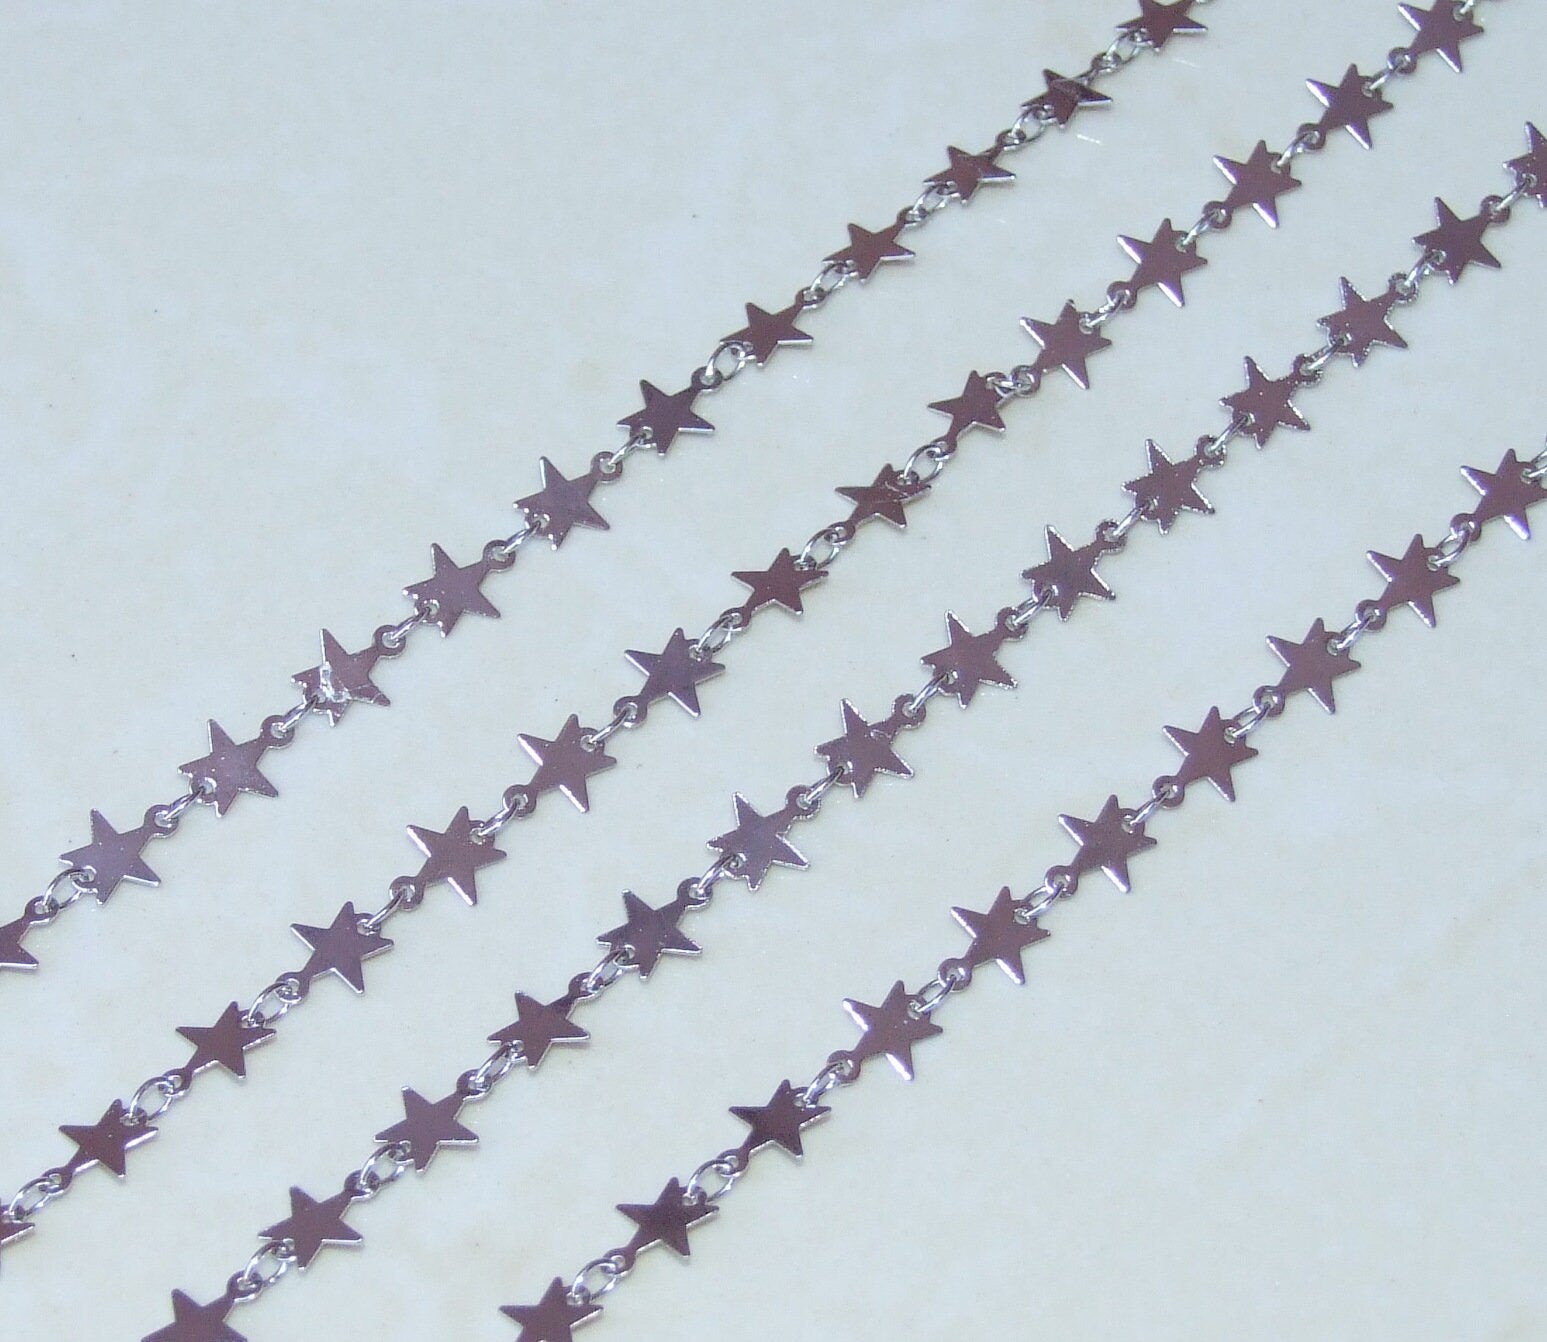 Silver Star Shaped Chain, Necklace Chain, Bulk Chain, Jewelry Making, Body Chain, Belly Chain, By the Foot, 6.5mm x .3mm